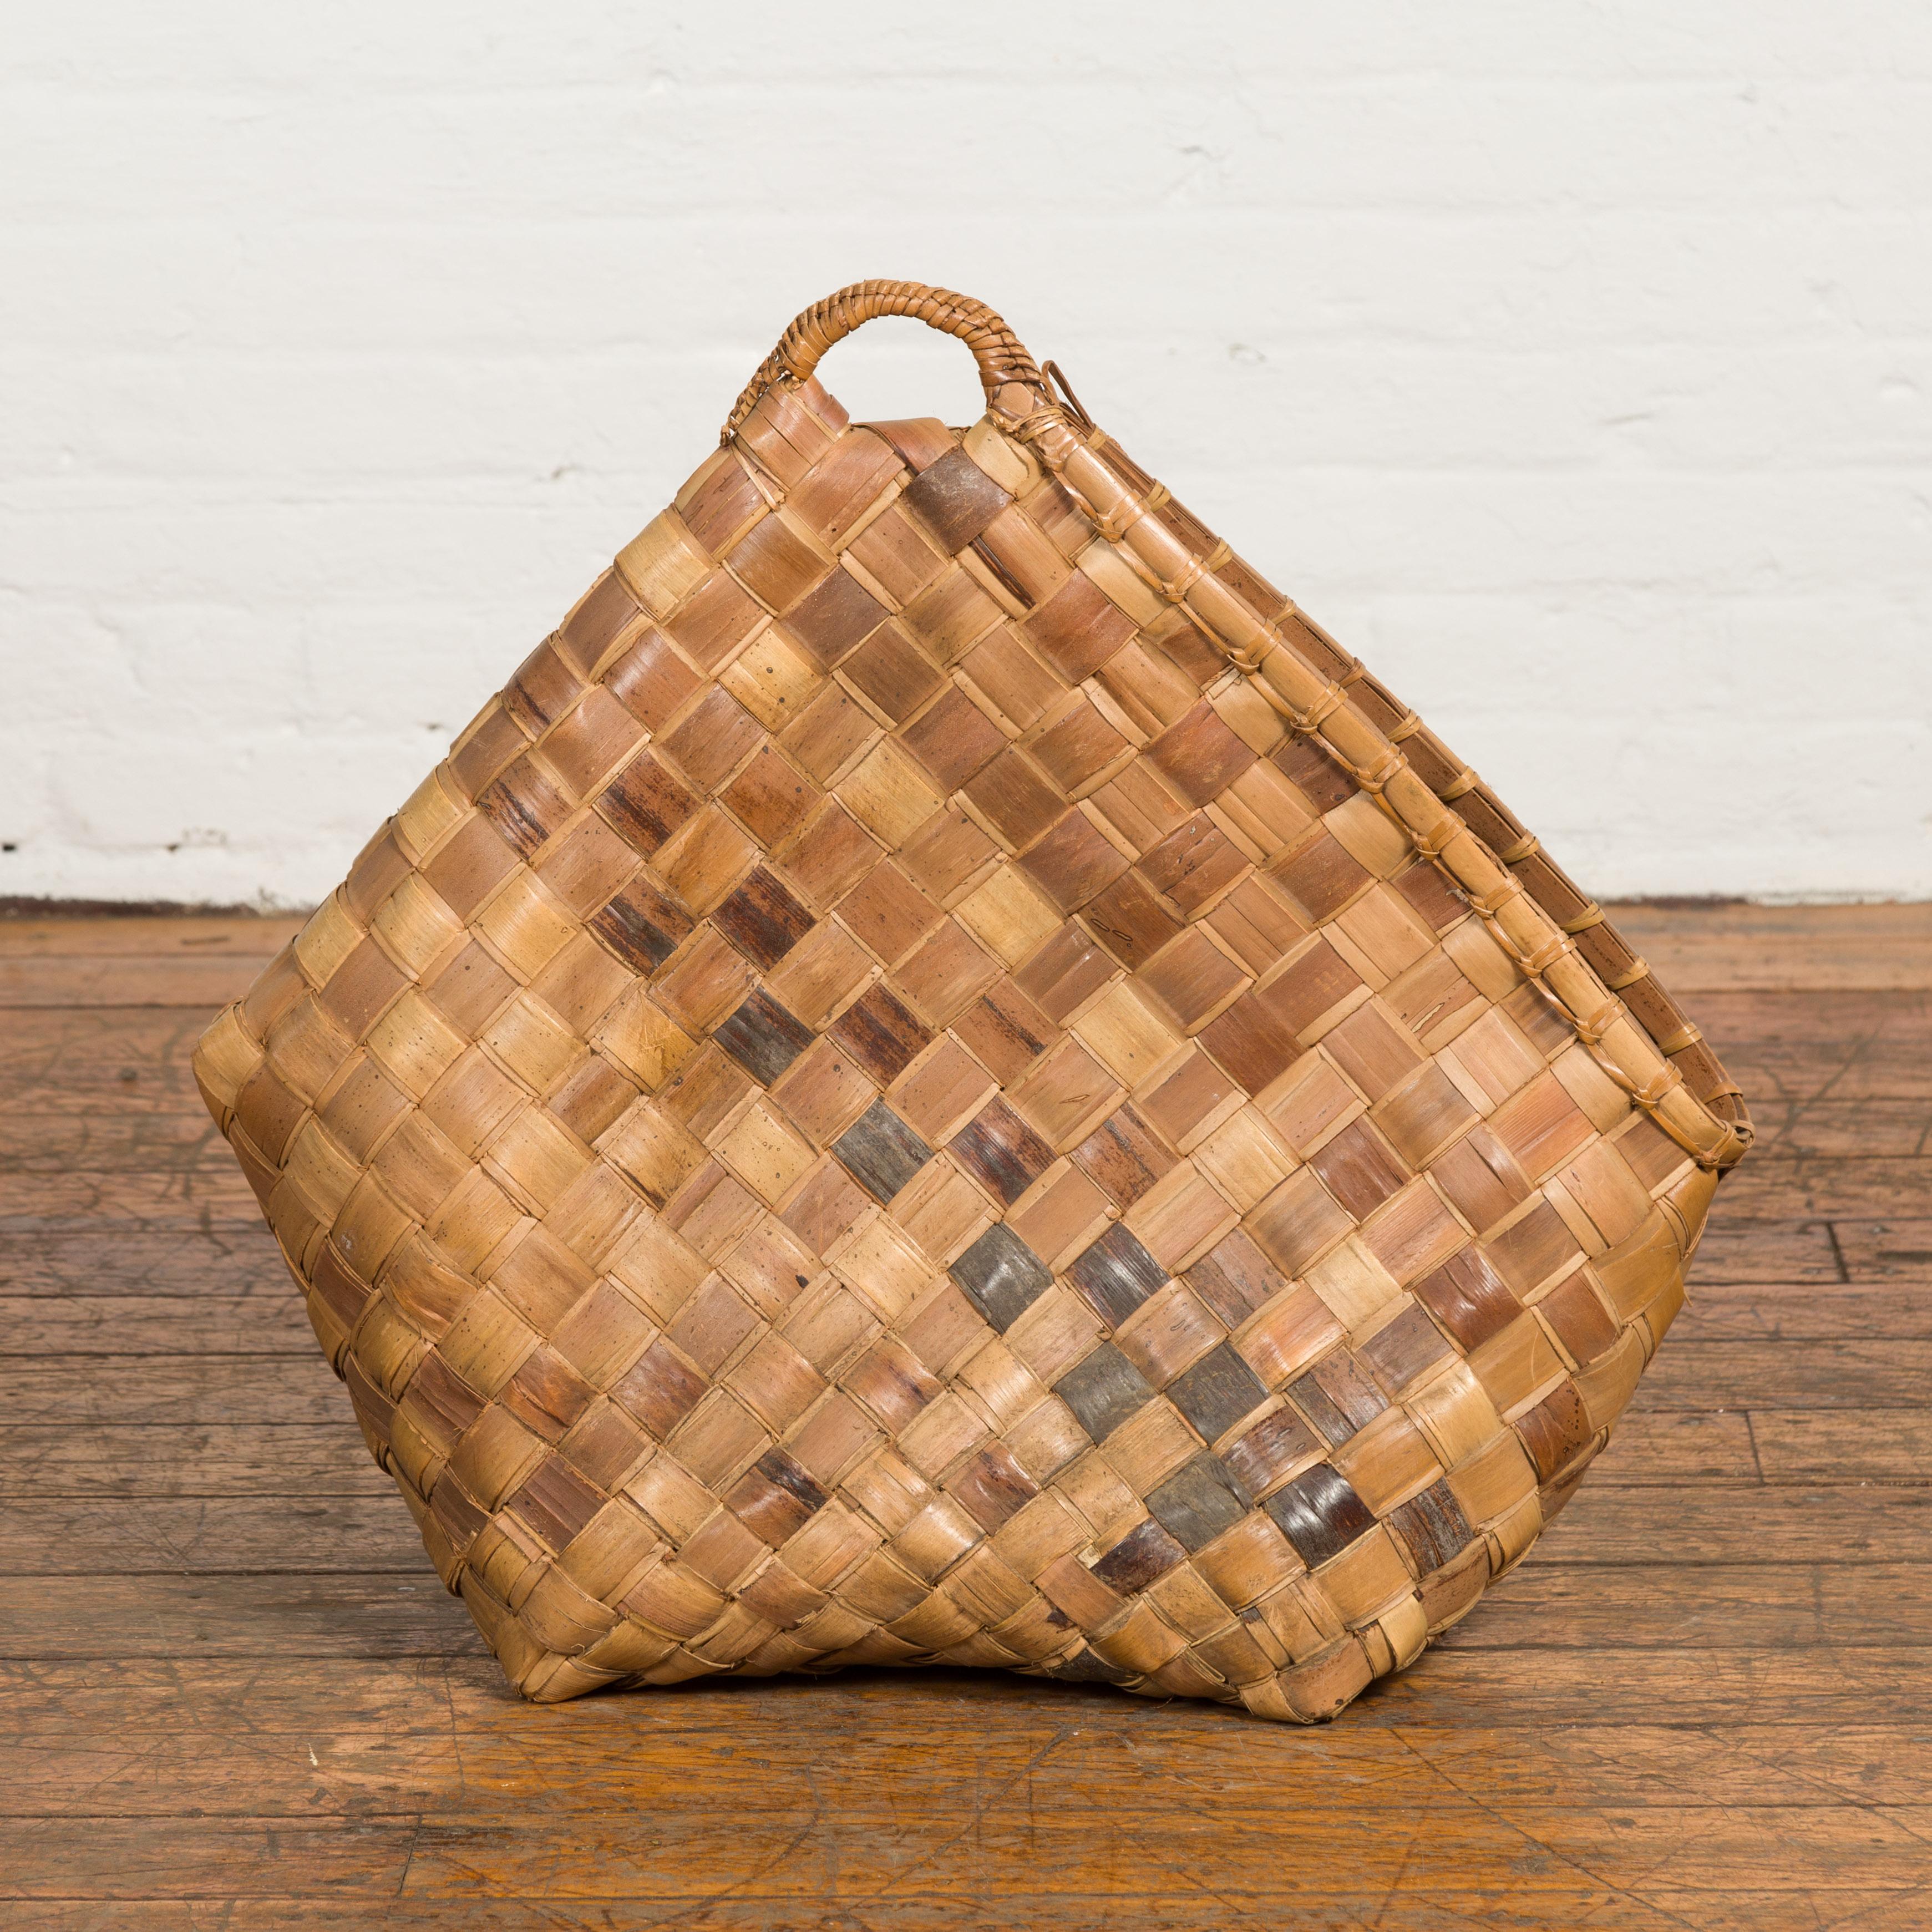 A hand woven karagumoy Filipino basket from the 19th century, with checkered two-toned structure, side opening and rustic character. Created in the Philippines during the 19th century, this decorative basket could be used as a newspaper or magazine